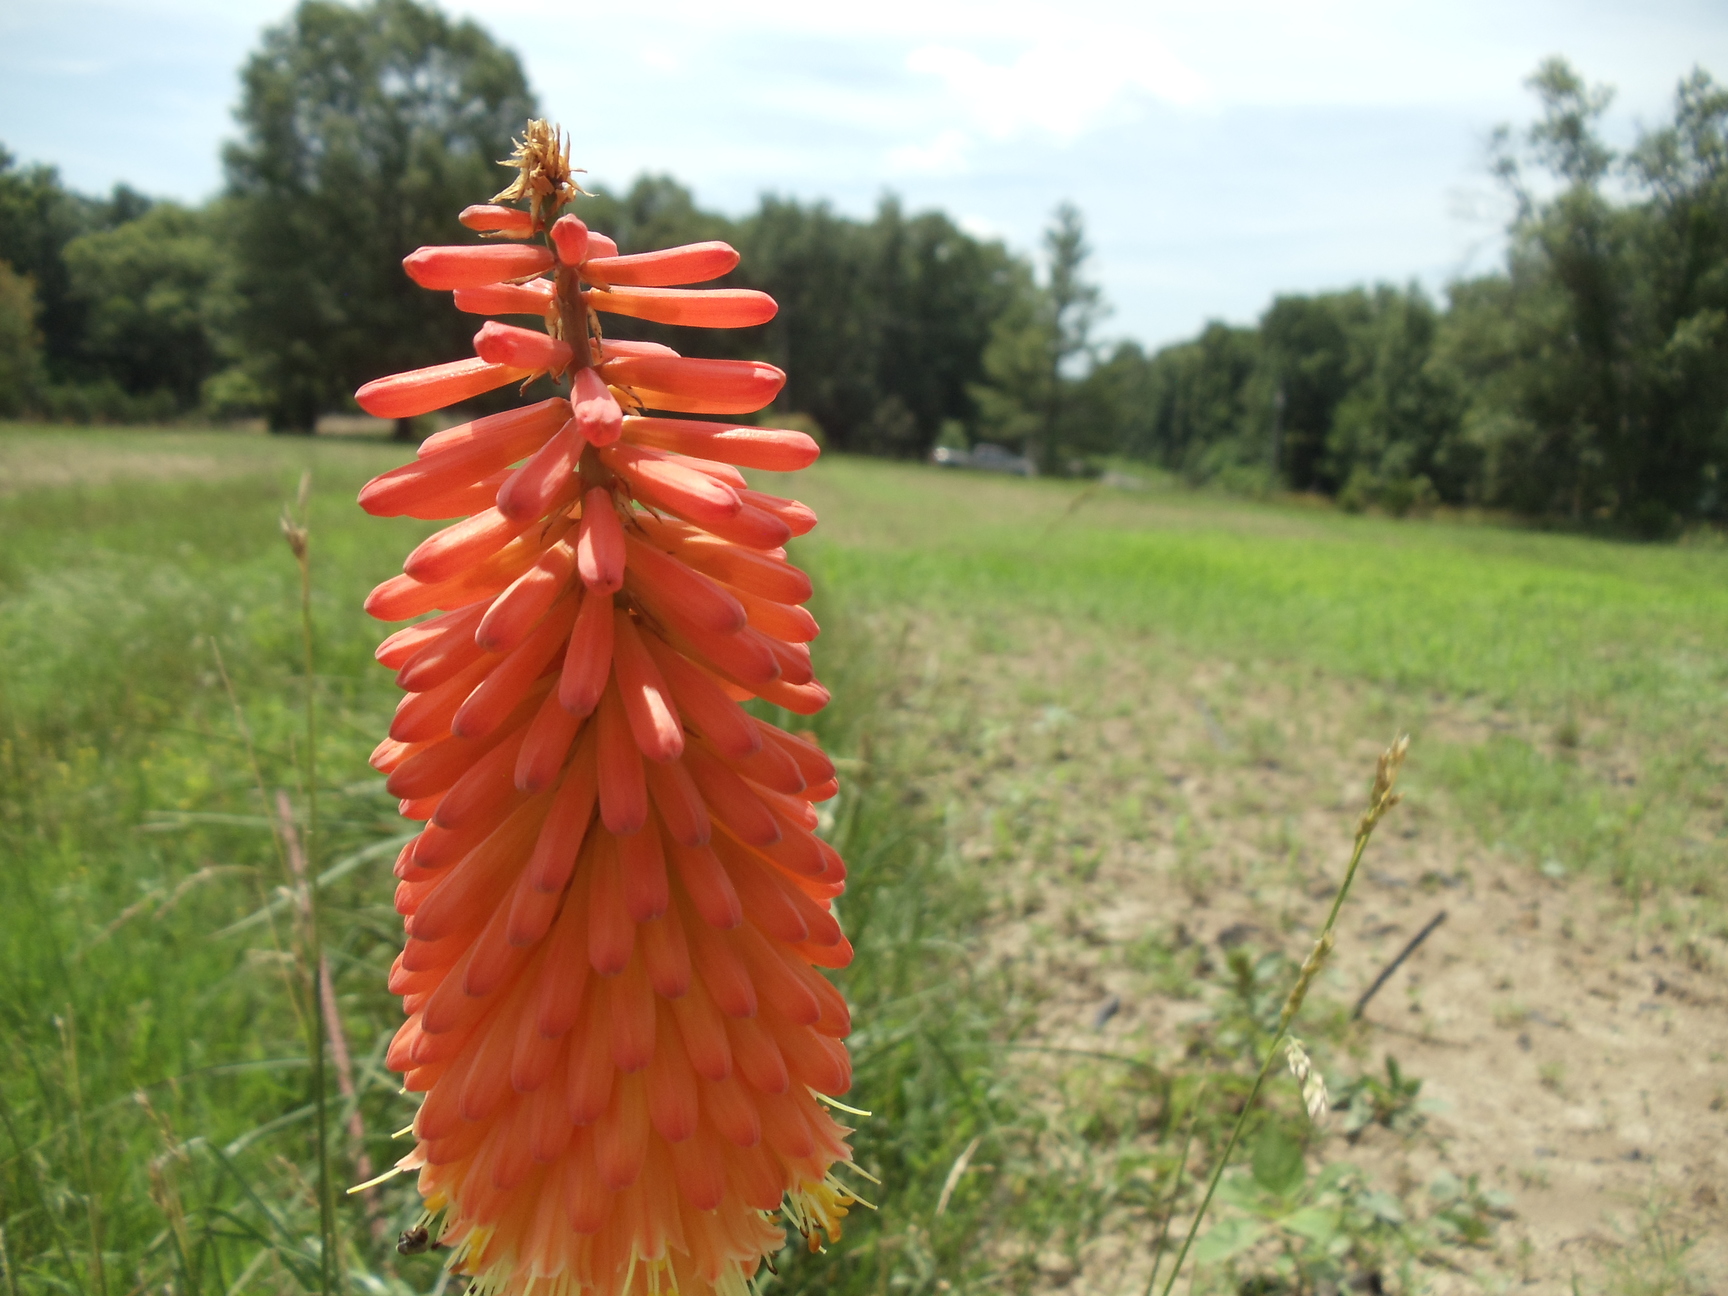 Another shot of the red hot poker